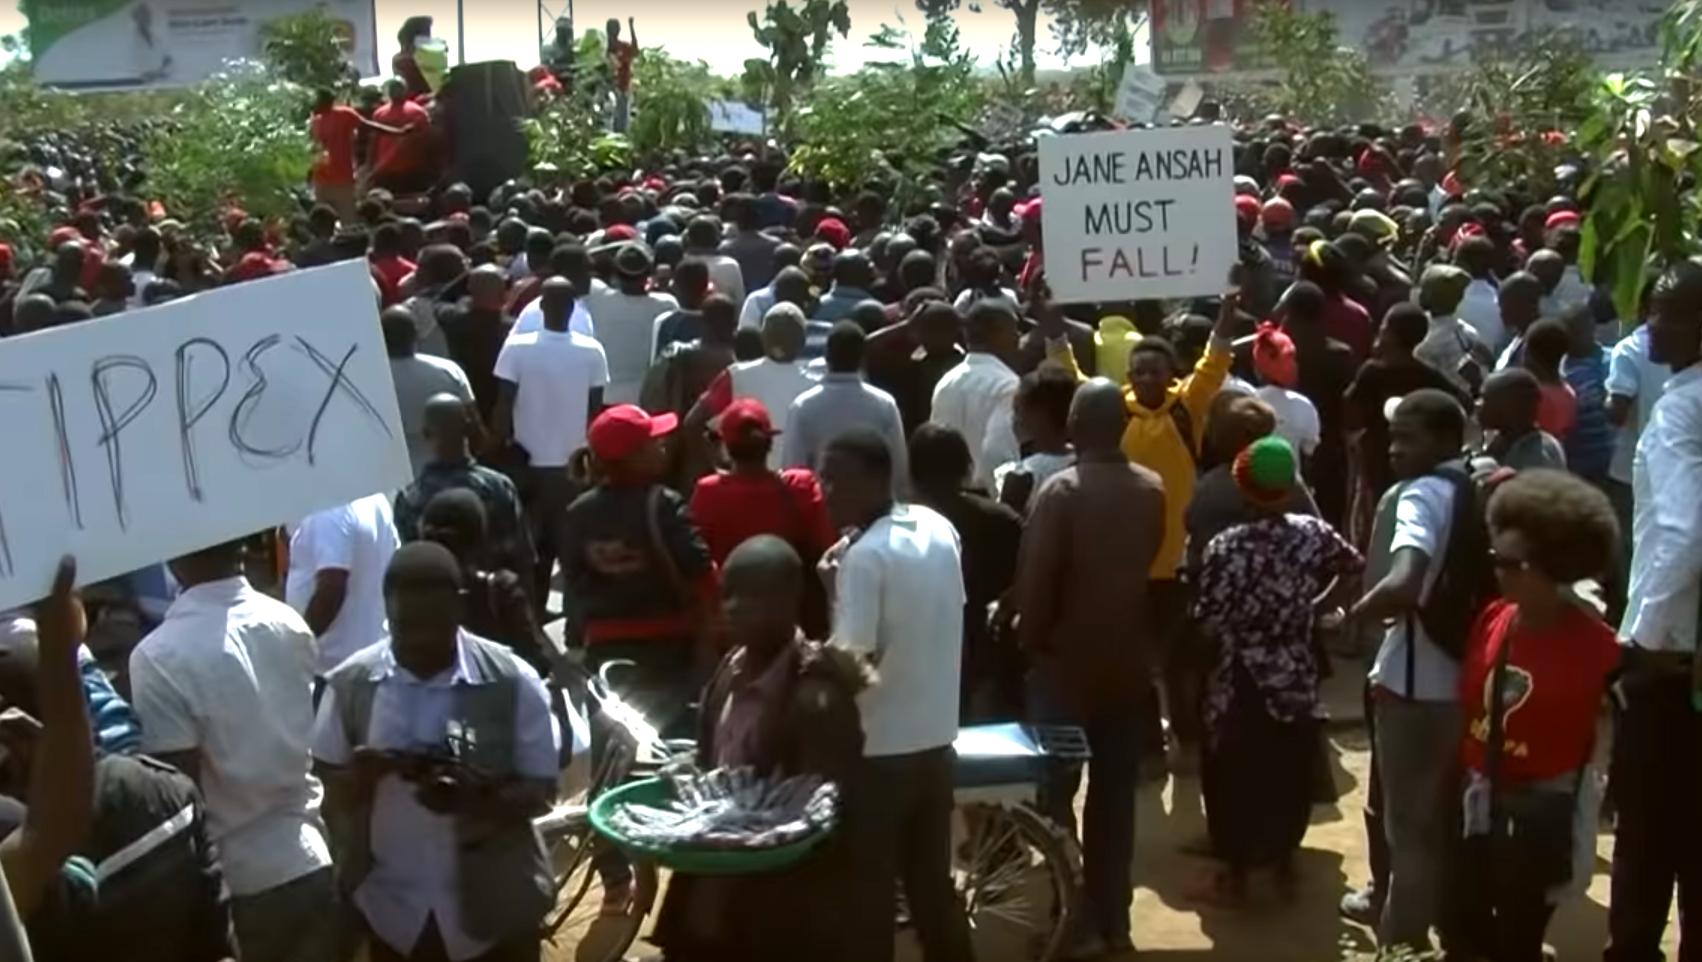 Malawi protests: Hundreds of thousands have turned out for protests in Malawi since May 2019. More are planned for 26-30 August.